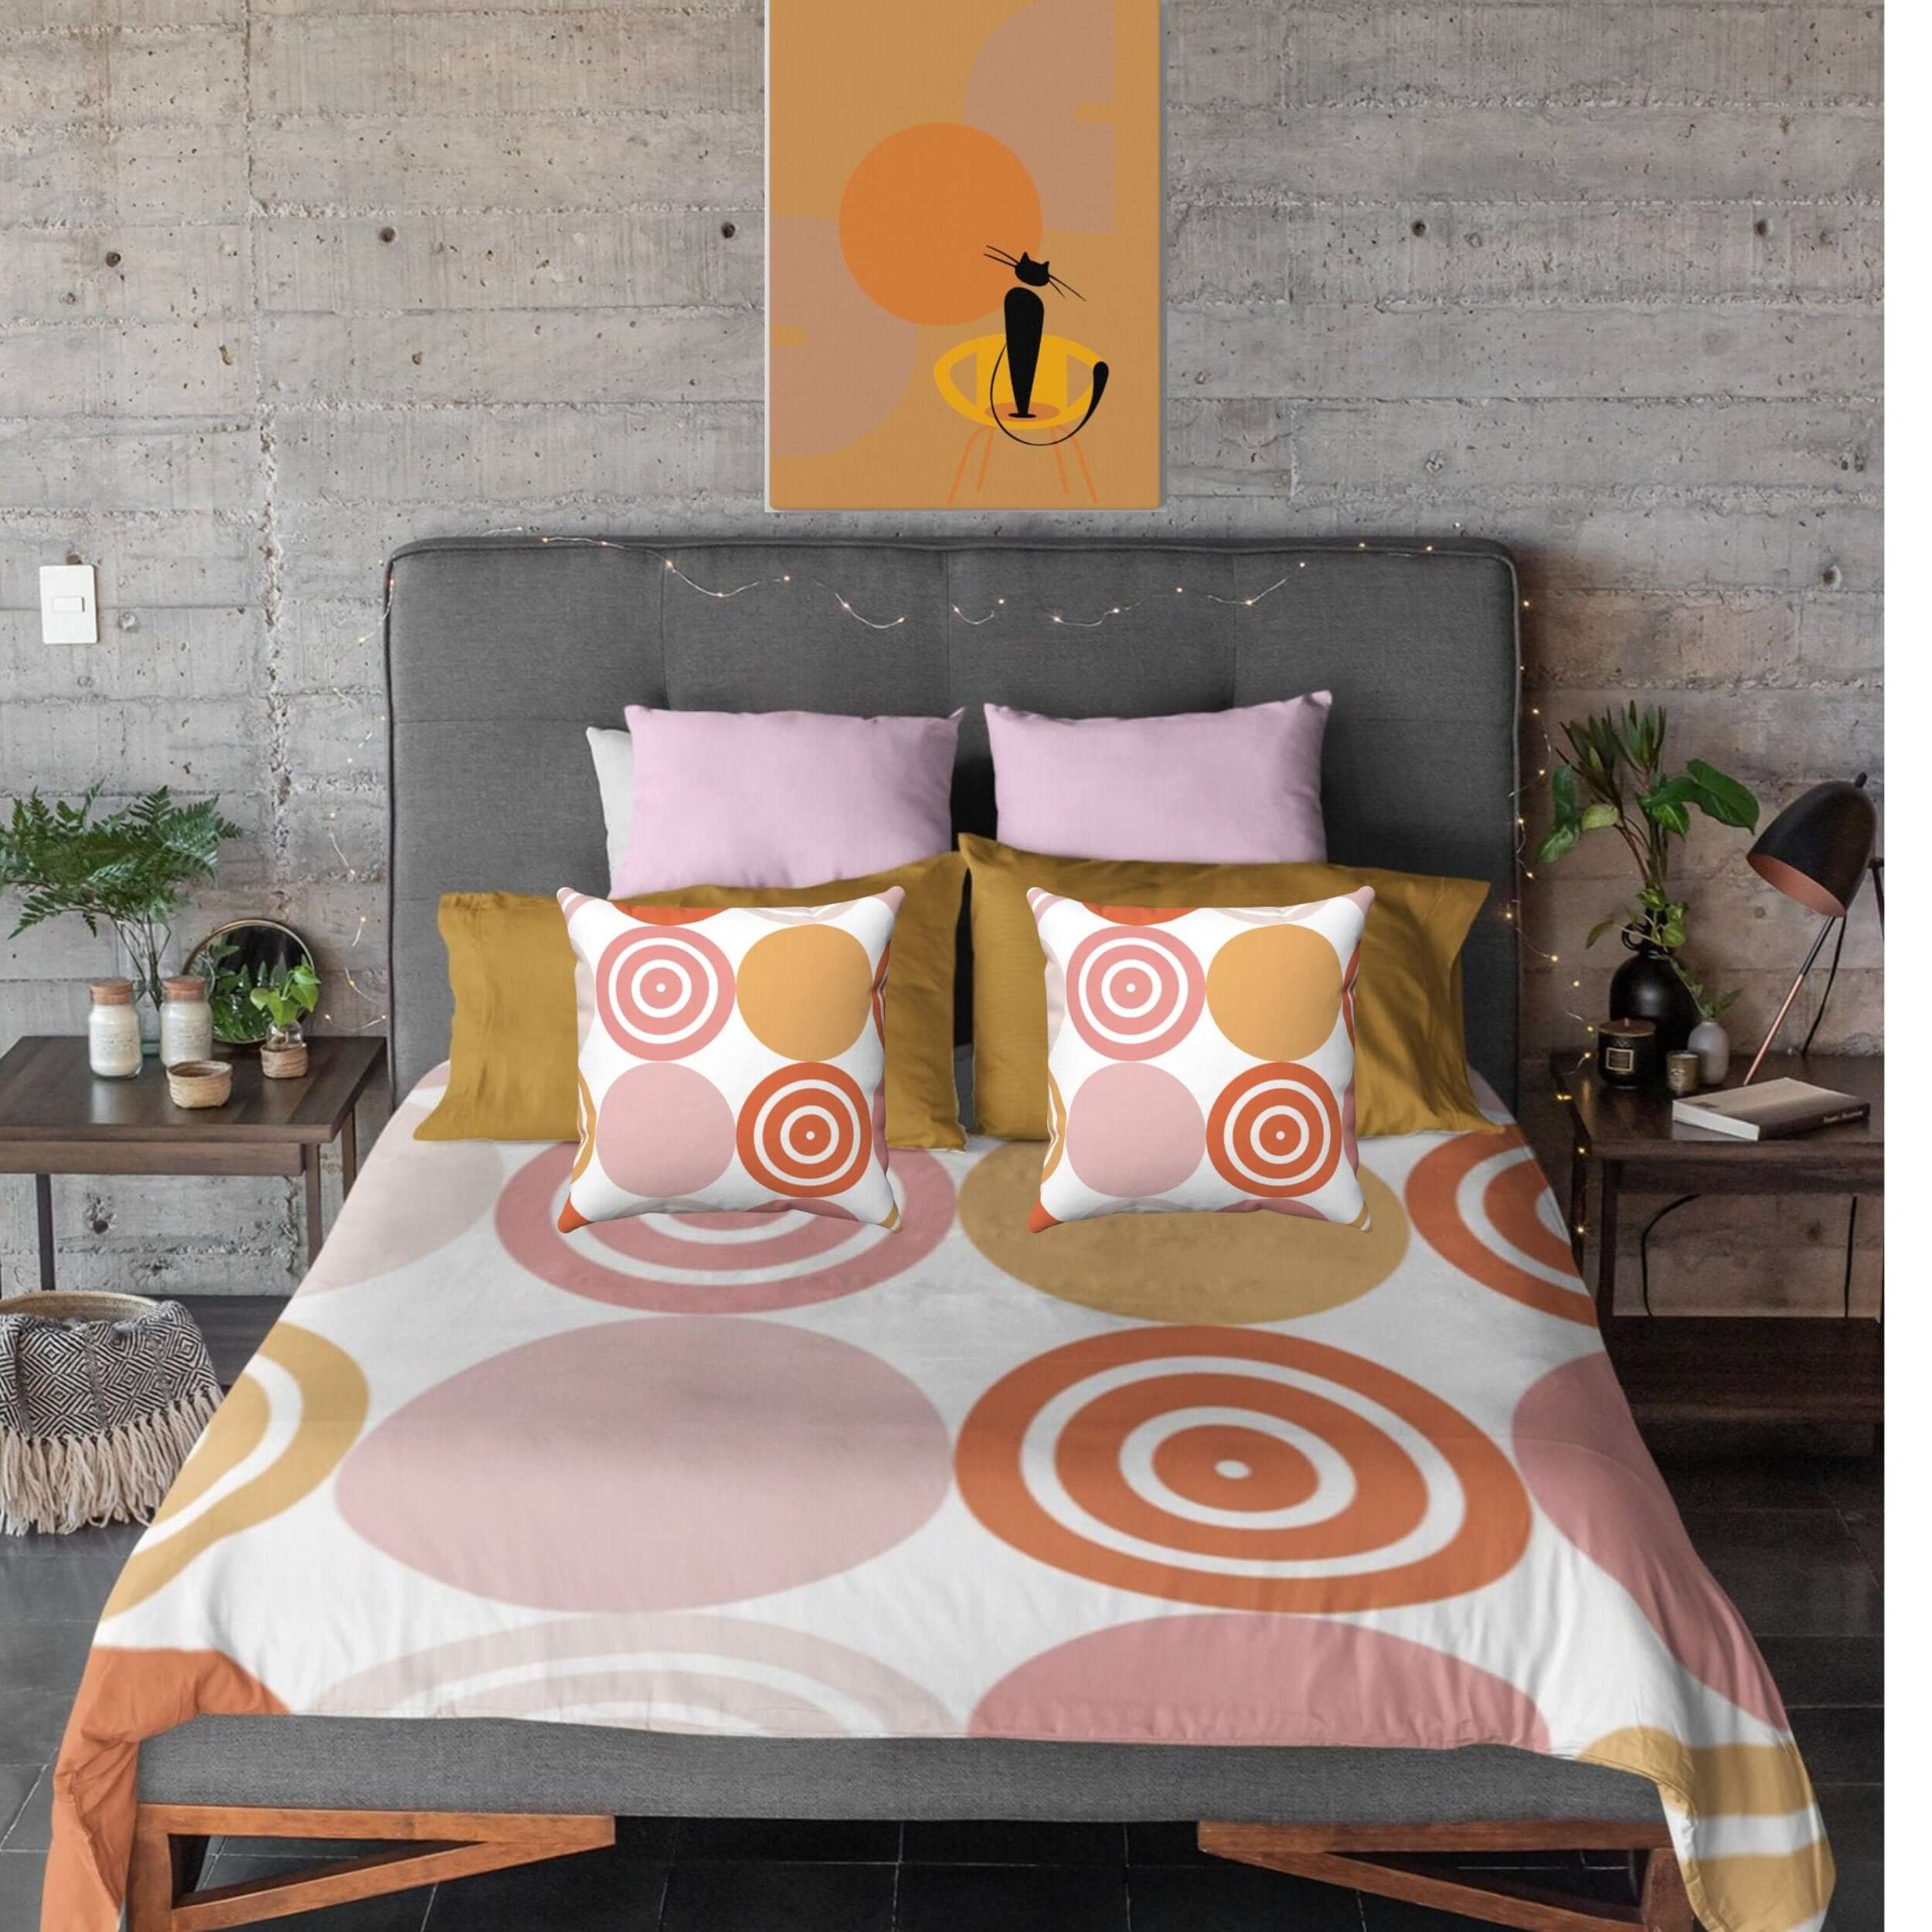 Retro Circle Pattern Pink, Mustard, and Cream Color Mid Century Modern Microfiber Duvet Cover Queen or Twin